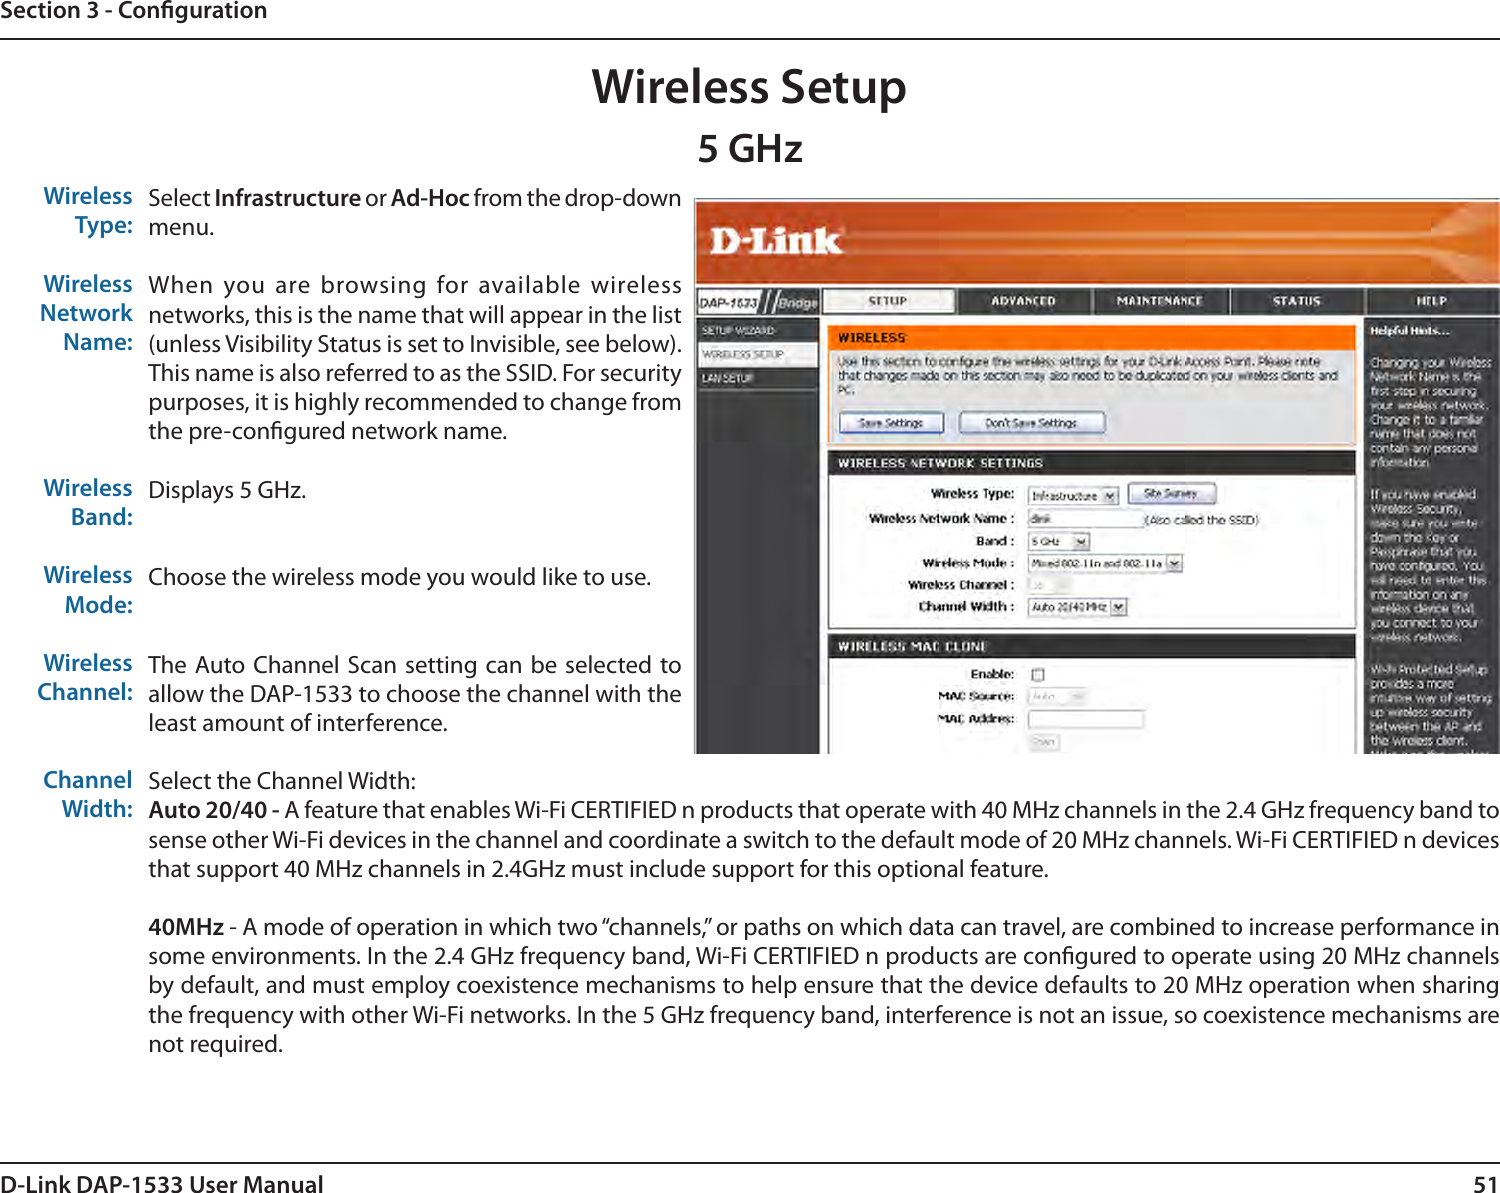 51D-Link DAP-1533 User ManualSection 3 - CongurationWireless Setup5 GHzWireless Type:Wireless Network Name:Wireless Band:Wireless Mode:Wireless Channel: Channel Width:Select Infrastructure or Ad-Hoc from the drop-down menu.When you are browsing for available wireless networks, this is the name that will appear in the list (unless Visibility Status is set to Invisible, see below). This name is also referred to as the SSID. For security purposes, it is highly recommended to change from the pre-congured network name.Displays 5 GHz.Choose the wireless mode you would like to use. The Auto Channel Scan setting can be selected to allow the DAP-1533 to choose the channel with the least amount of interference. Select the Channel Width:Auto 20/40 - A feature that enables Wi-Fi CERTIFIED n products that operate with 40 MHz channels in the 2.4 GHz frequency band to sense other Wi-Fi devices in the channel and coordinate a switch to the default mode of 20 MHz channels. Wi-Fi CERTIFIED n devices that support 40 MHz channels in 2.4GHz must include support for this optional feature.40MHz - A mode of operation in which two “channels,” or paths on which data can travel, are combined to increase performance in some environments. In the 2.4 GHz frequency band, Wi-Fi CERTIFIED n products are congured to operate using 20 MHz channels by default, and must employ coexistence mechanisms to help ensure that the device defaults to 20 MHz operation when sharing the frequency with other Wi-Fi networks. In the 5 GHz frequency band, interference is not an issue, so coexistence mechanisms are not required.